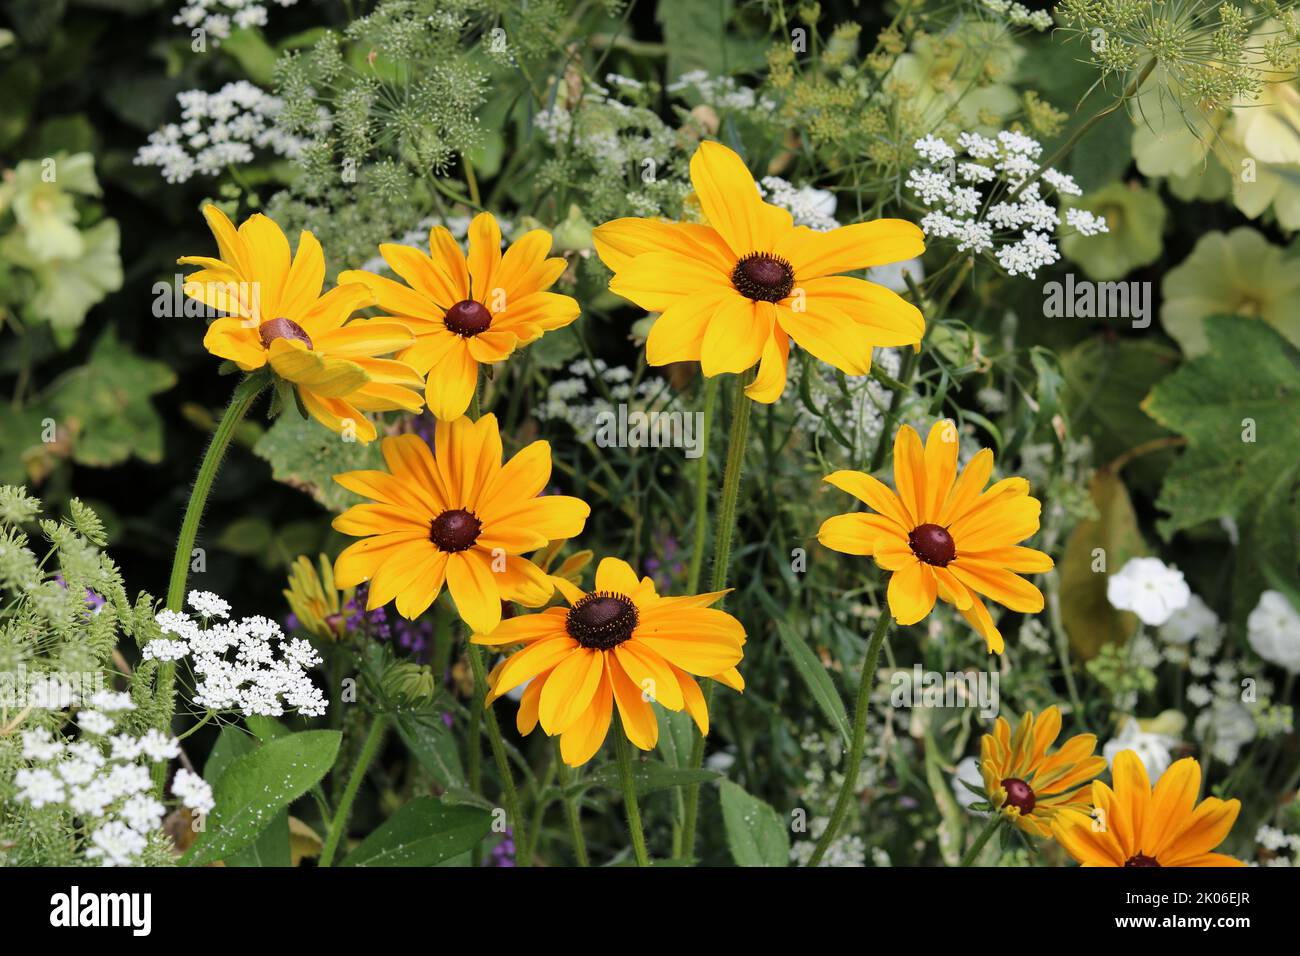 Full frame image of black eyed Susan flowers in flowerbed with cow parsley Stock Photo